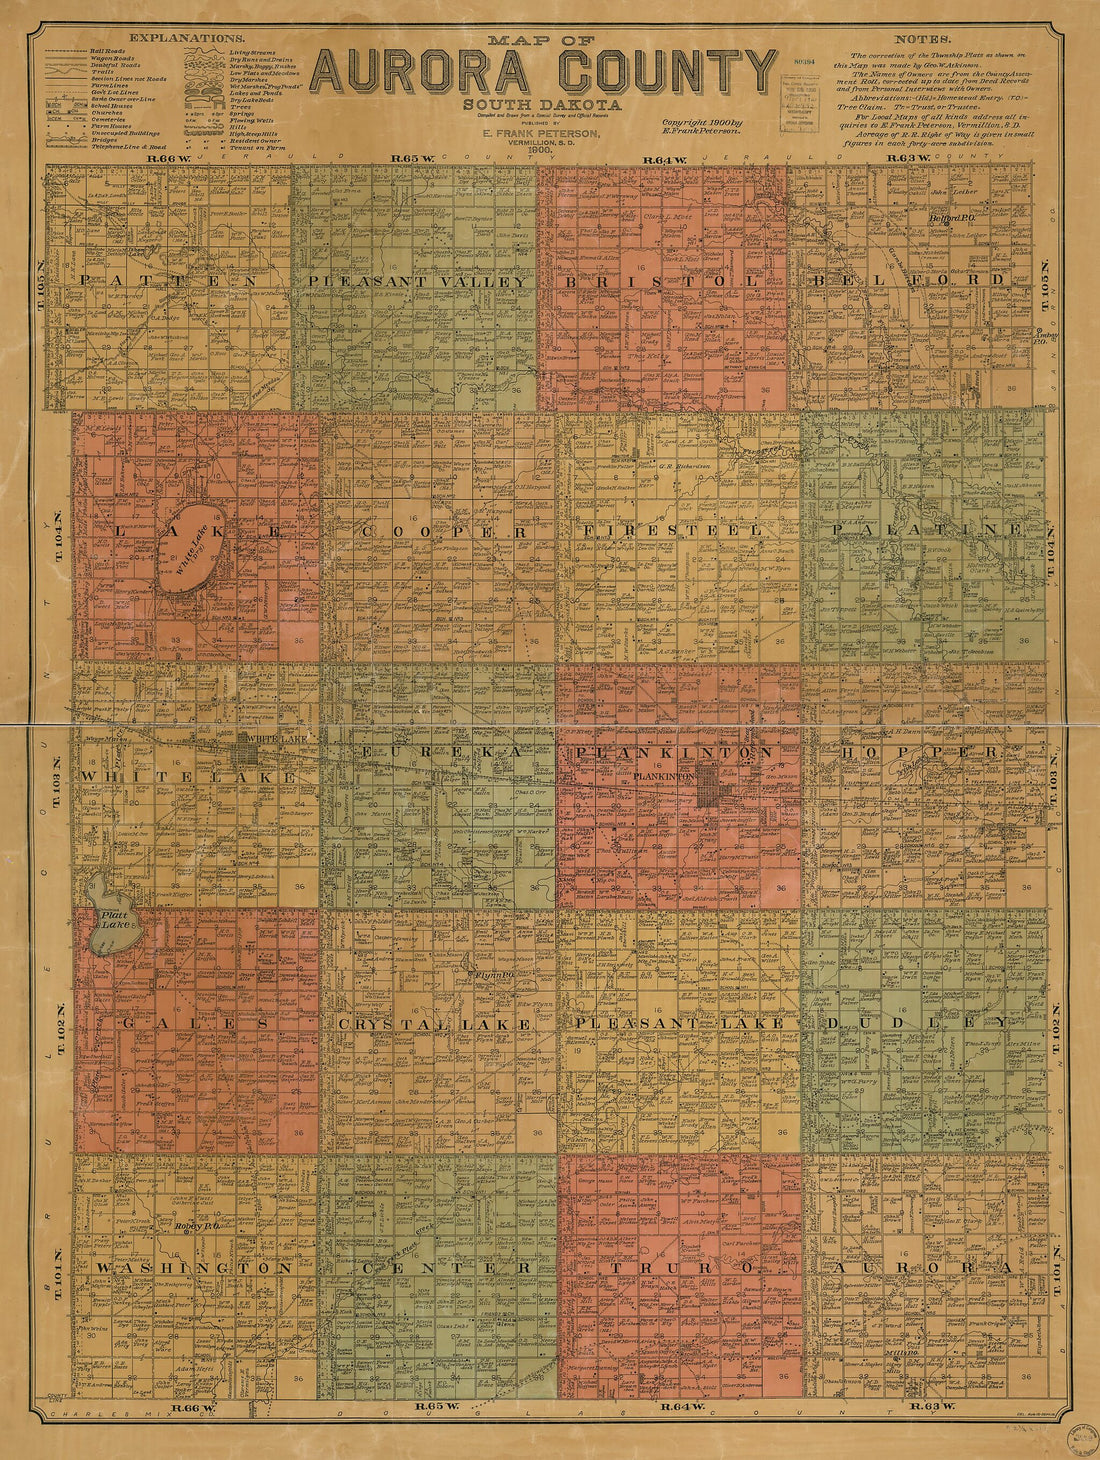 This old map of Map of Aurora County, South Dakota : Compiled and Drawn from a Special Survey and Official Records from 1900 was created by E. Frank Peterson in 1900